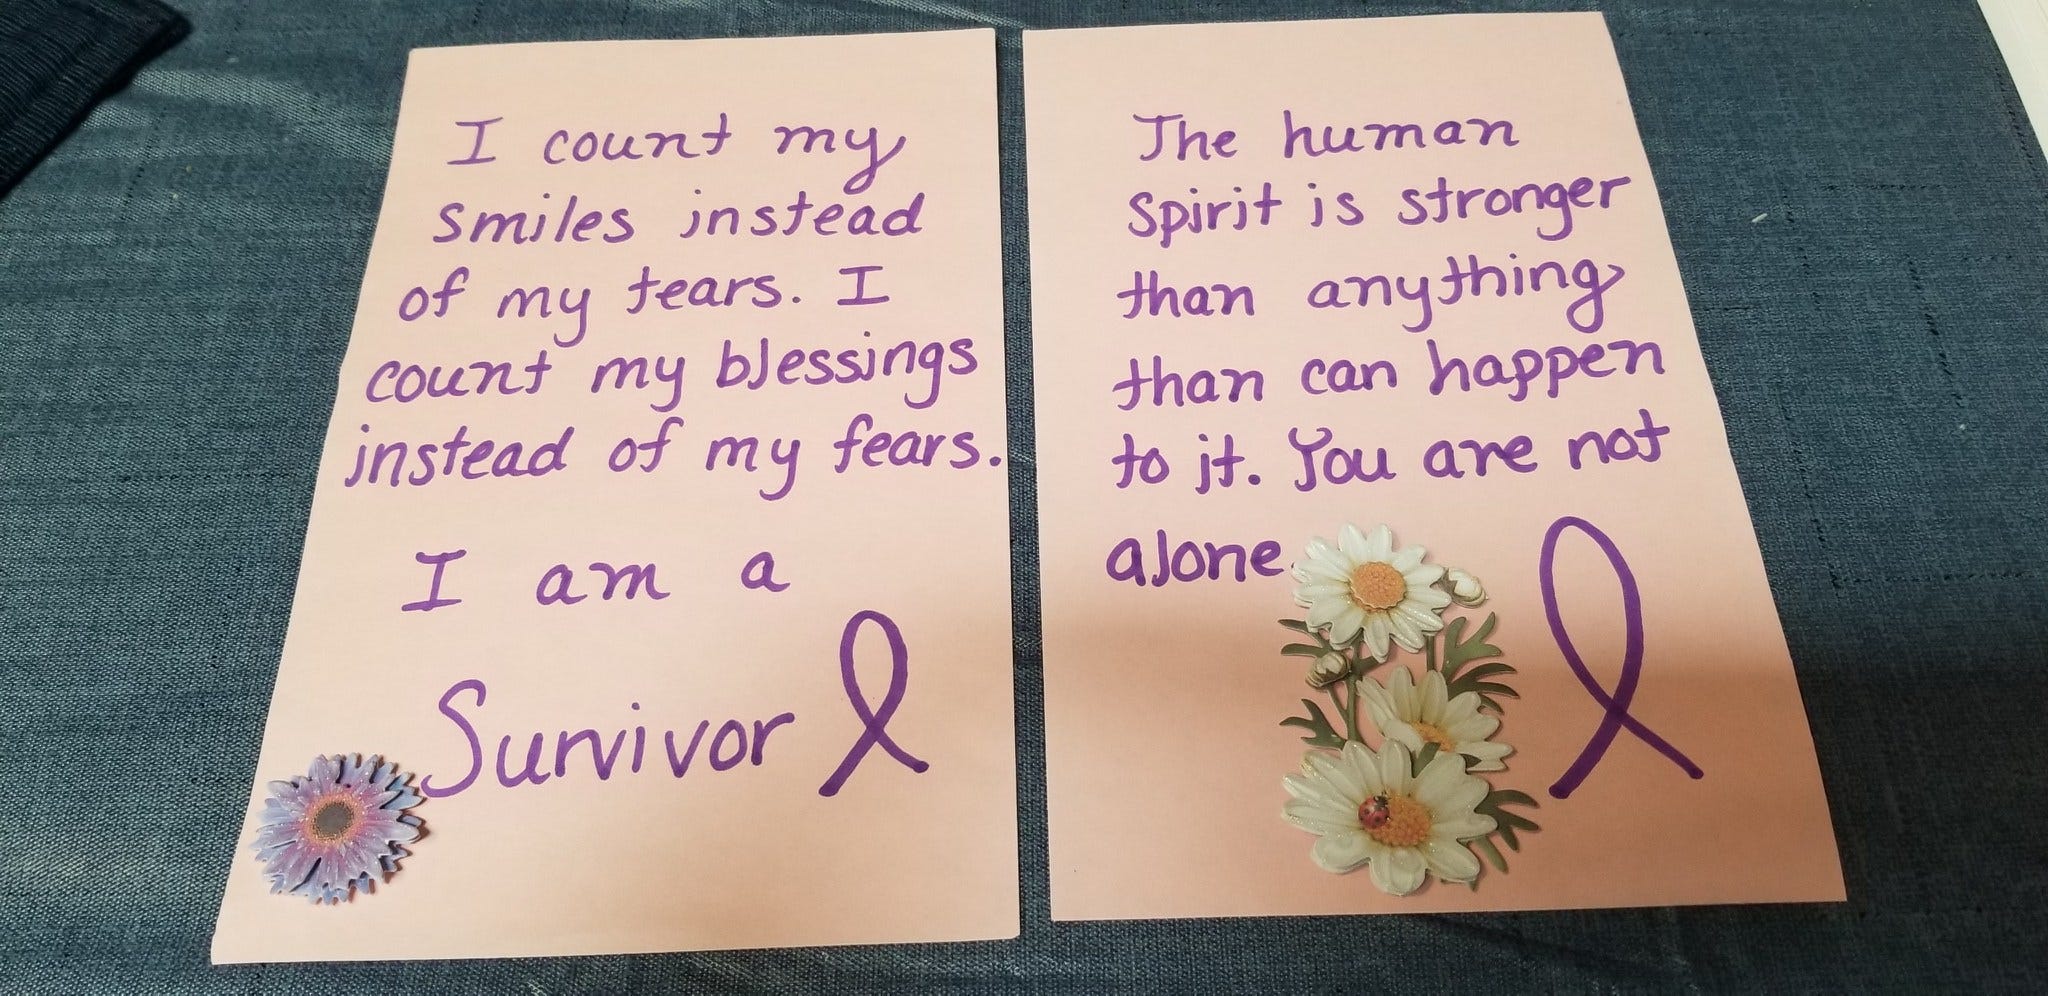 American Cancer Society Volunteers Collect Notes Of Support For Cancer Patients